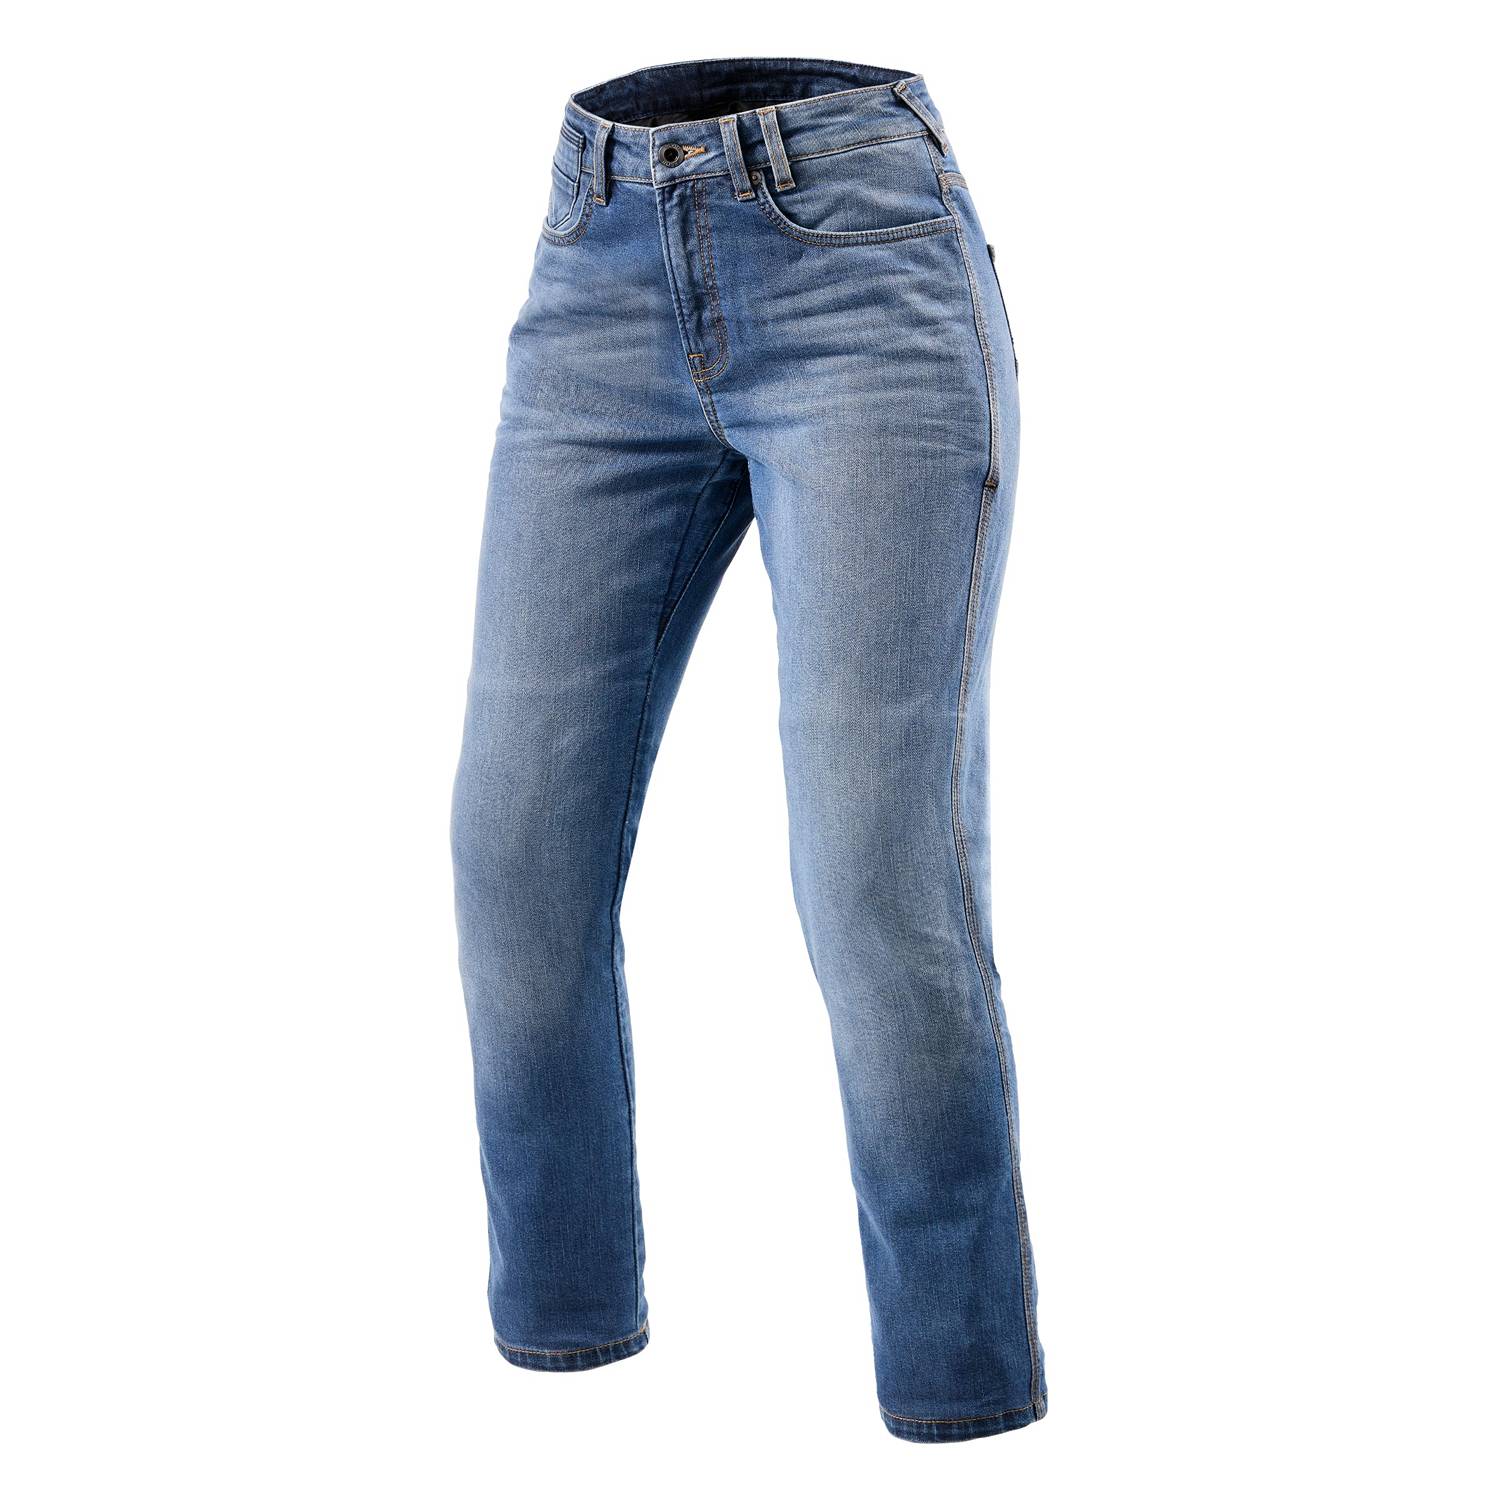 Image of REV'IT! Jeans Victoria 2 Ladies SF Classic Blue Used Motorcycle Jeans Size L32/W26 ID 8700001342803